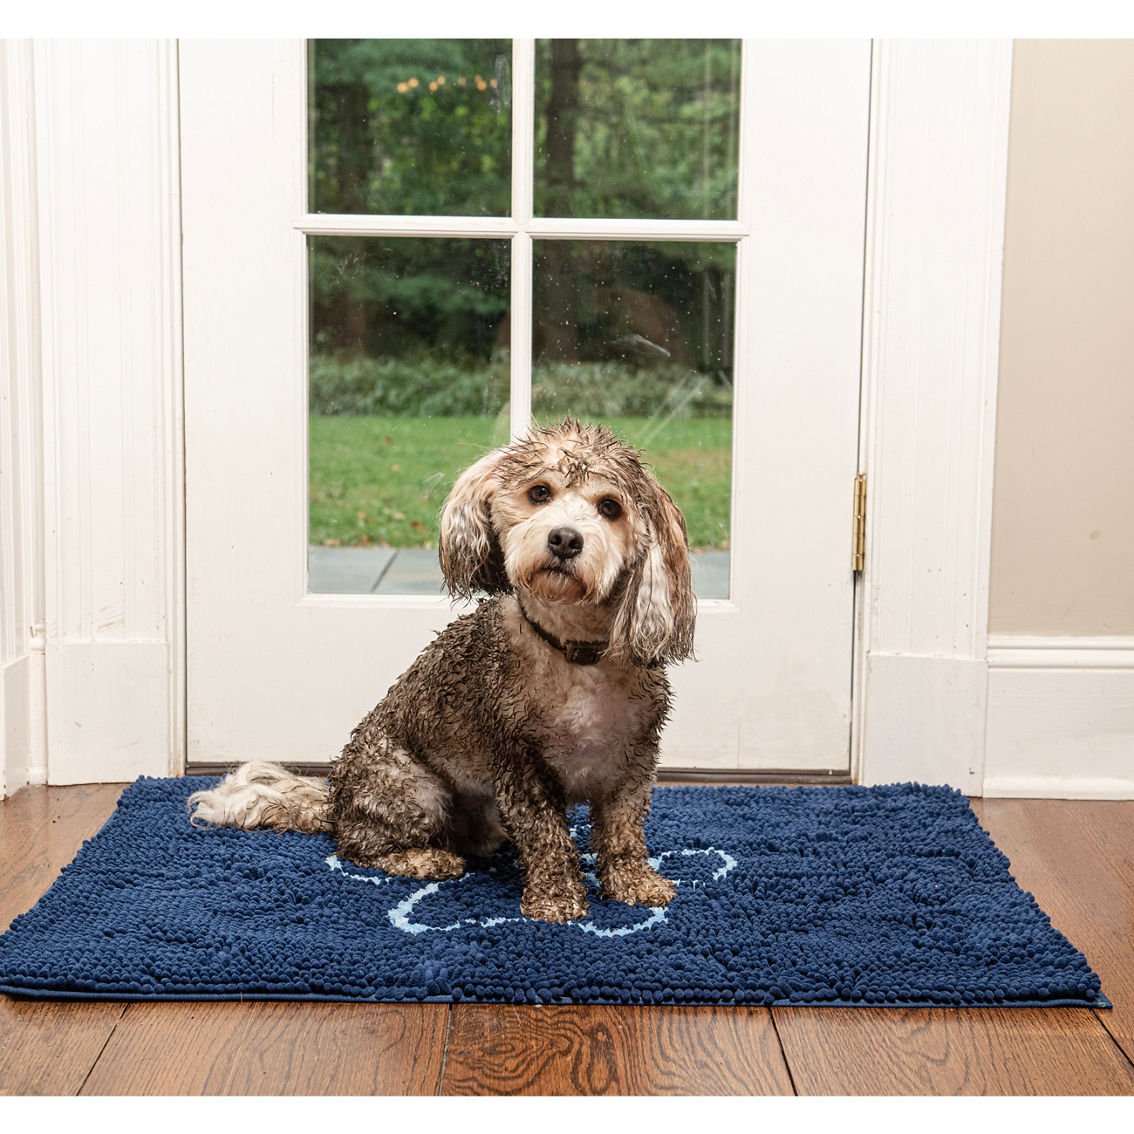 Dog Gone Smart Pet Products Dirty Dog Door Mat - Image 2 of 2